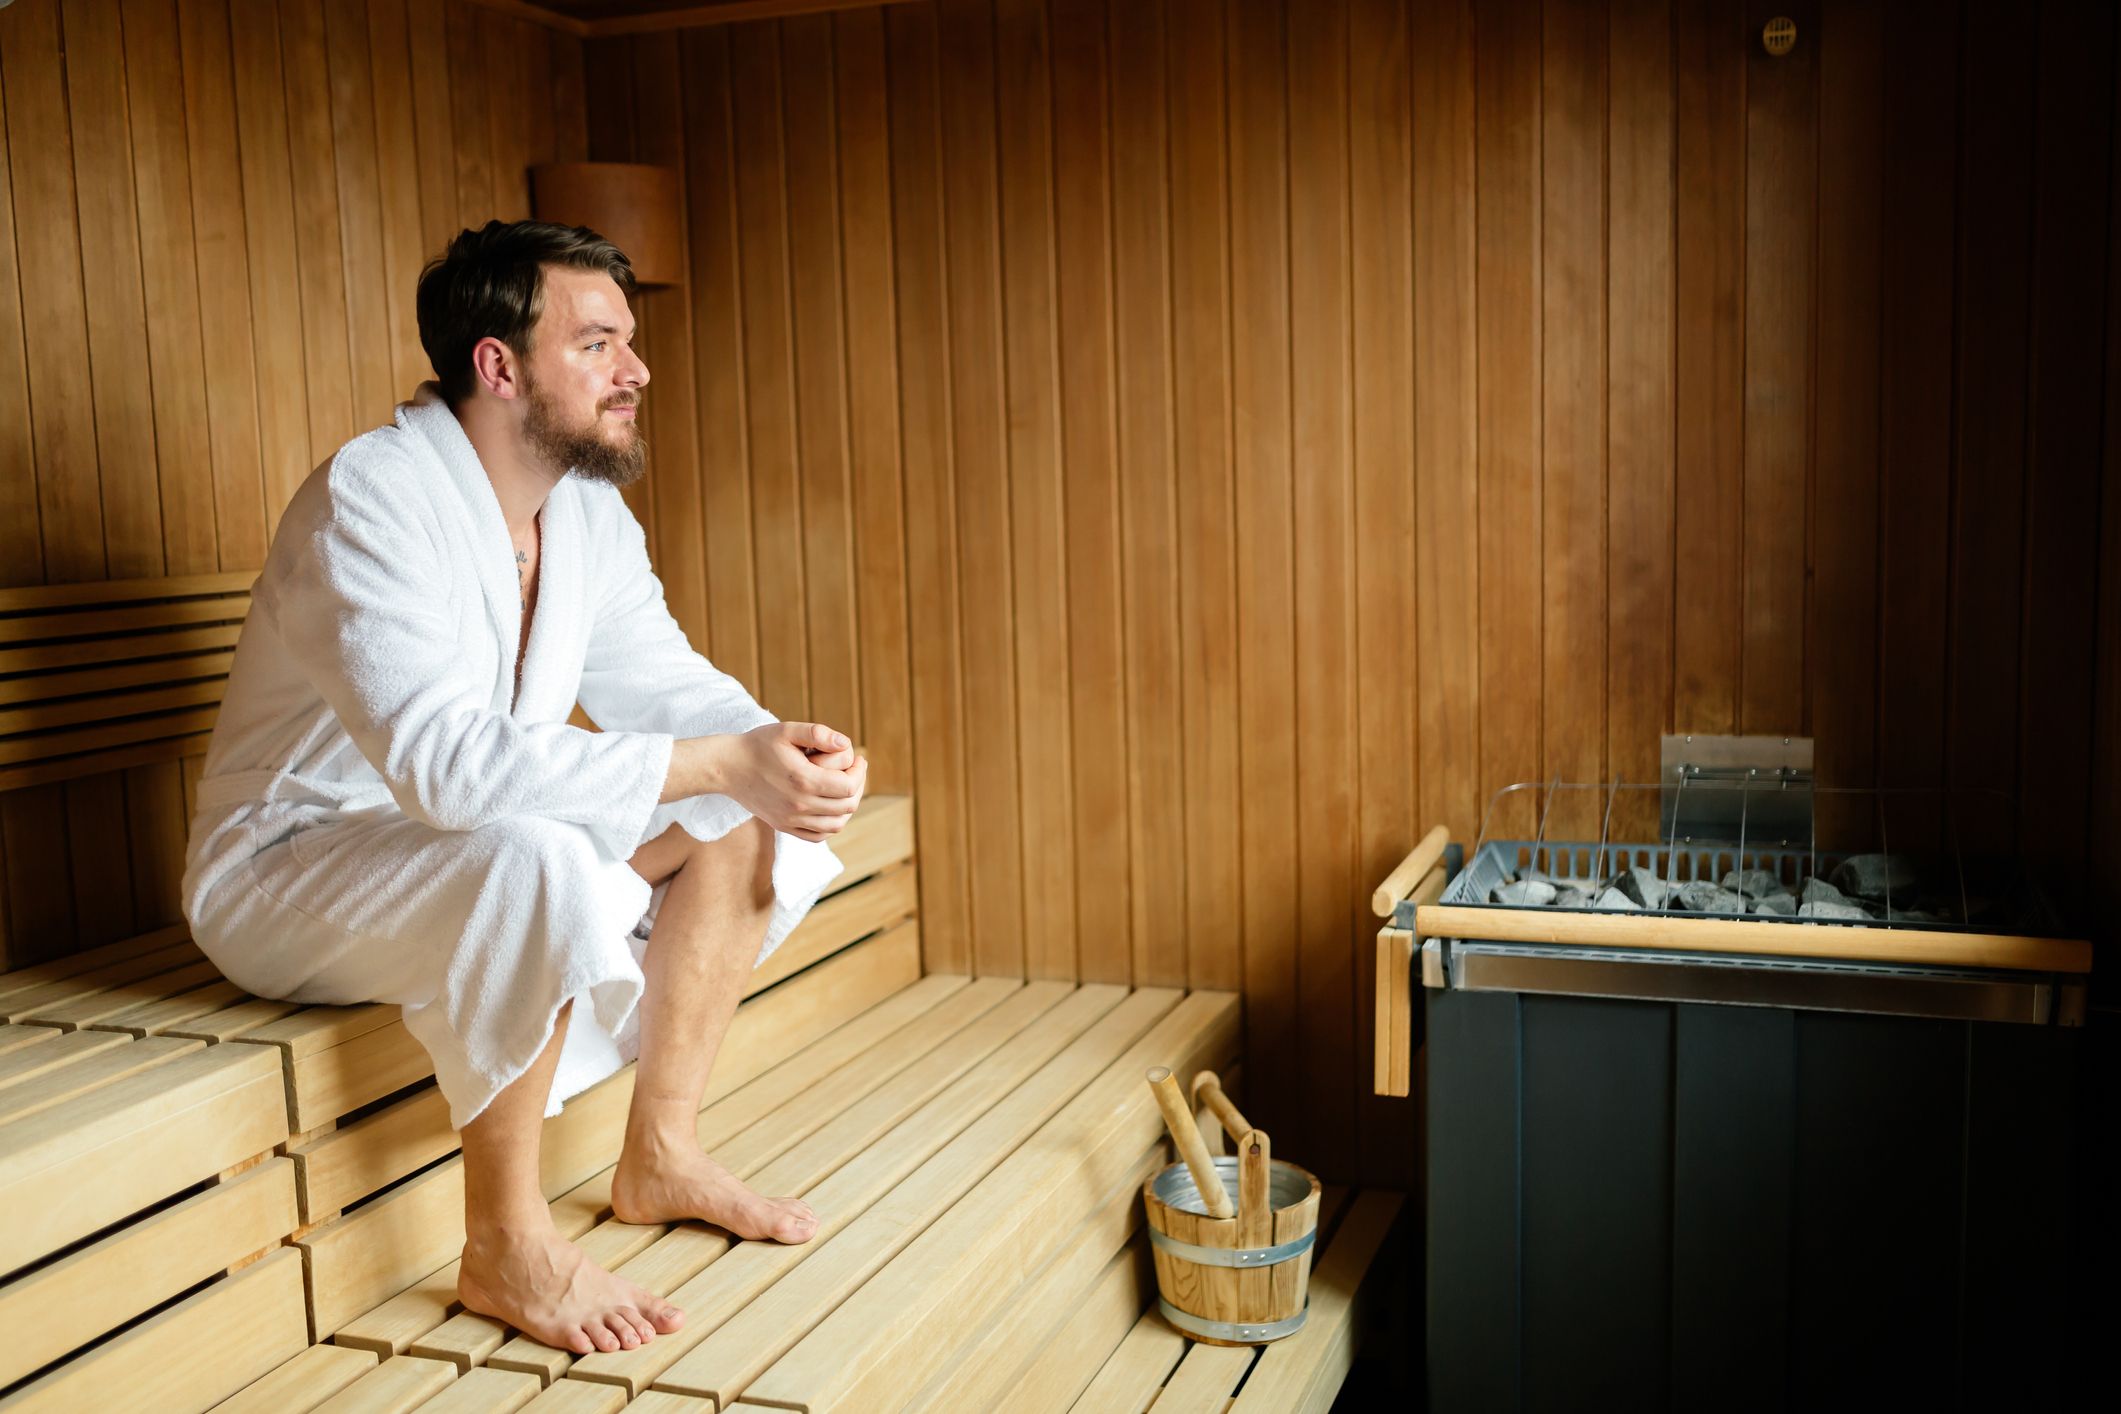 6 Health Benefits of Using the Sauna - Sauna After Working Out